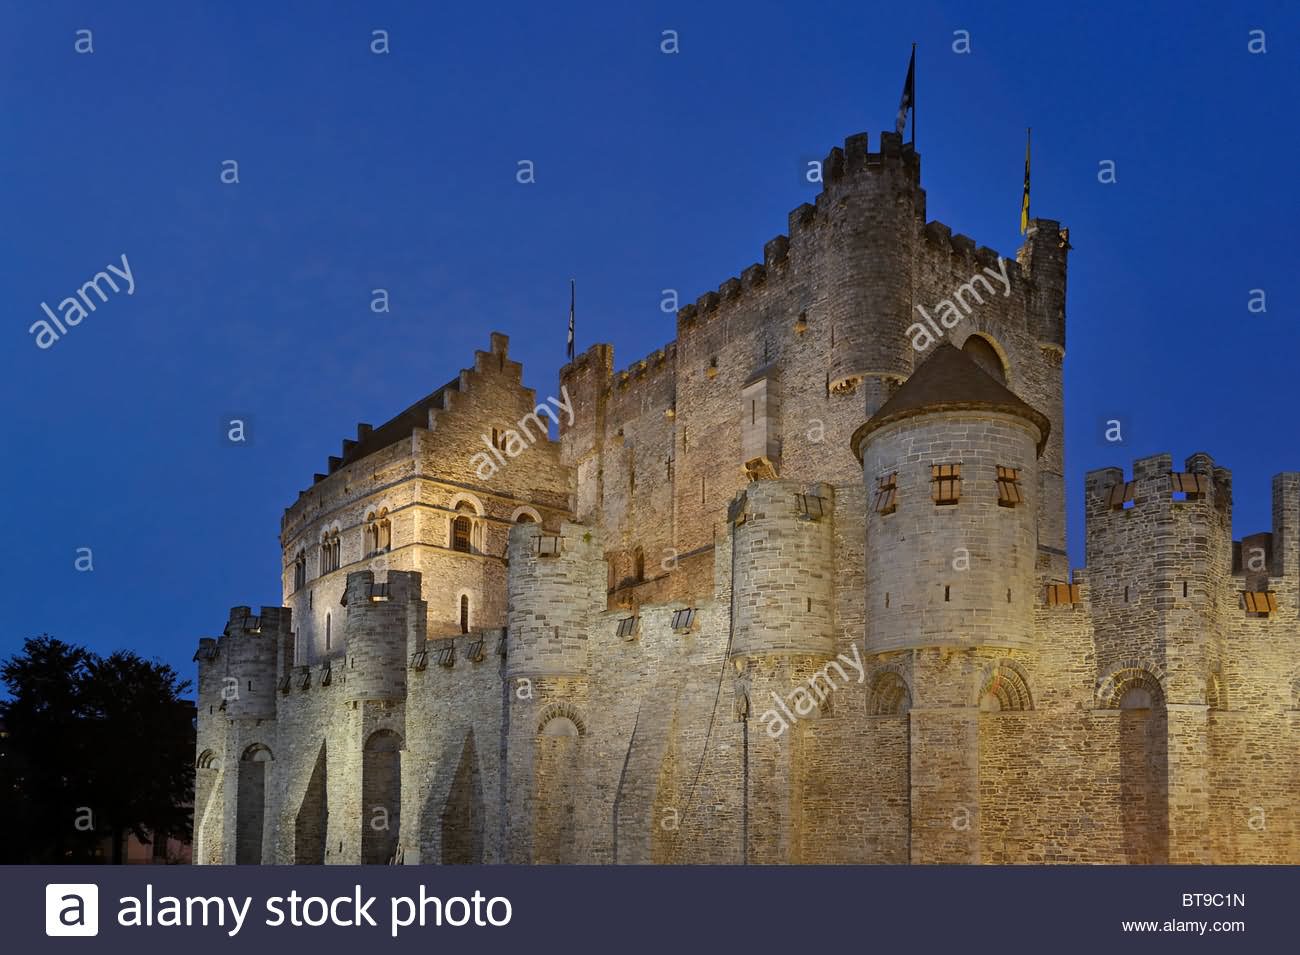 The Gravensteen Castle At Night Picture